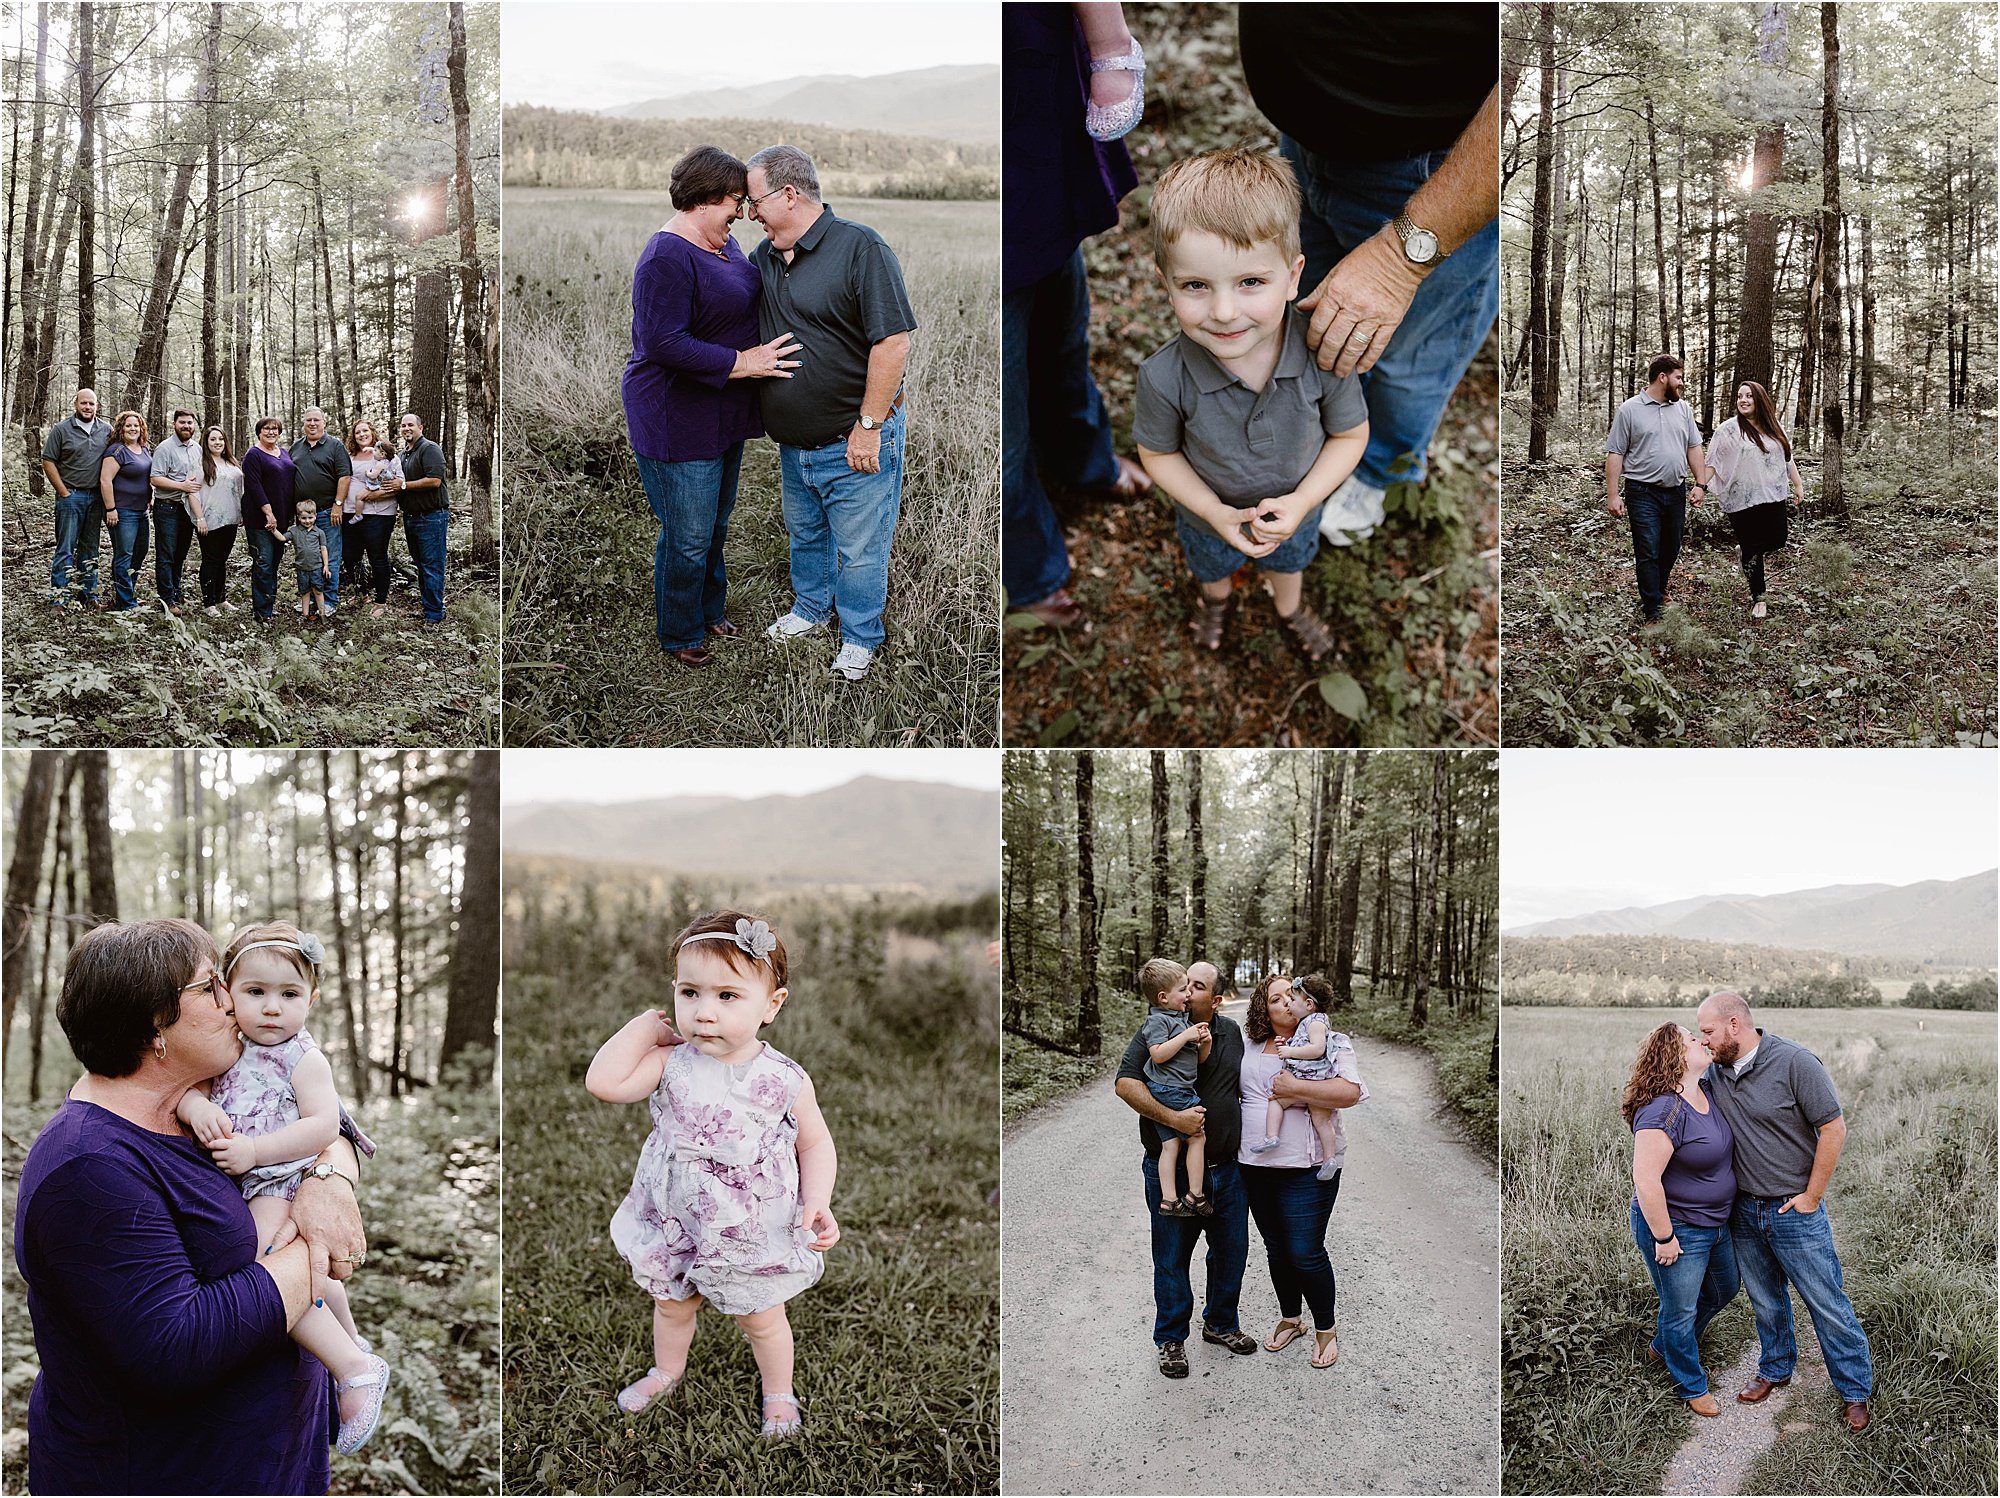 Cades Cove Family Session in the Smokies